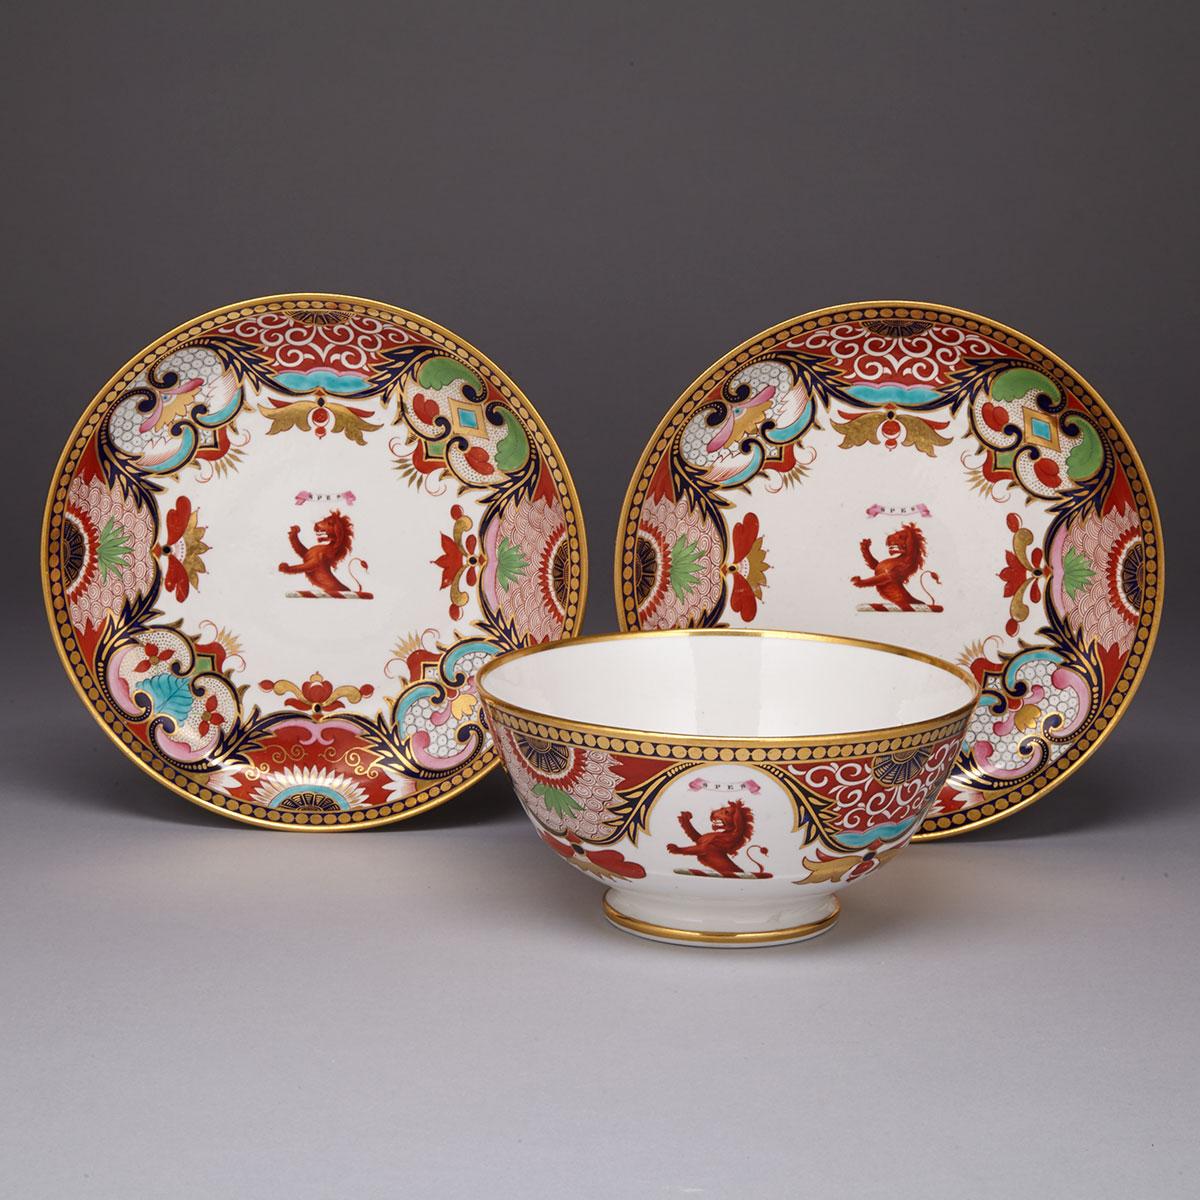 Pair of Flight, Barr & Barr Worcester Armorial Saucer Dishes and a Bowl, c.1813-20